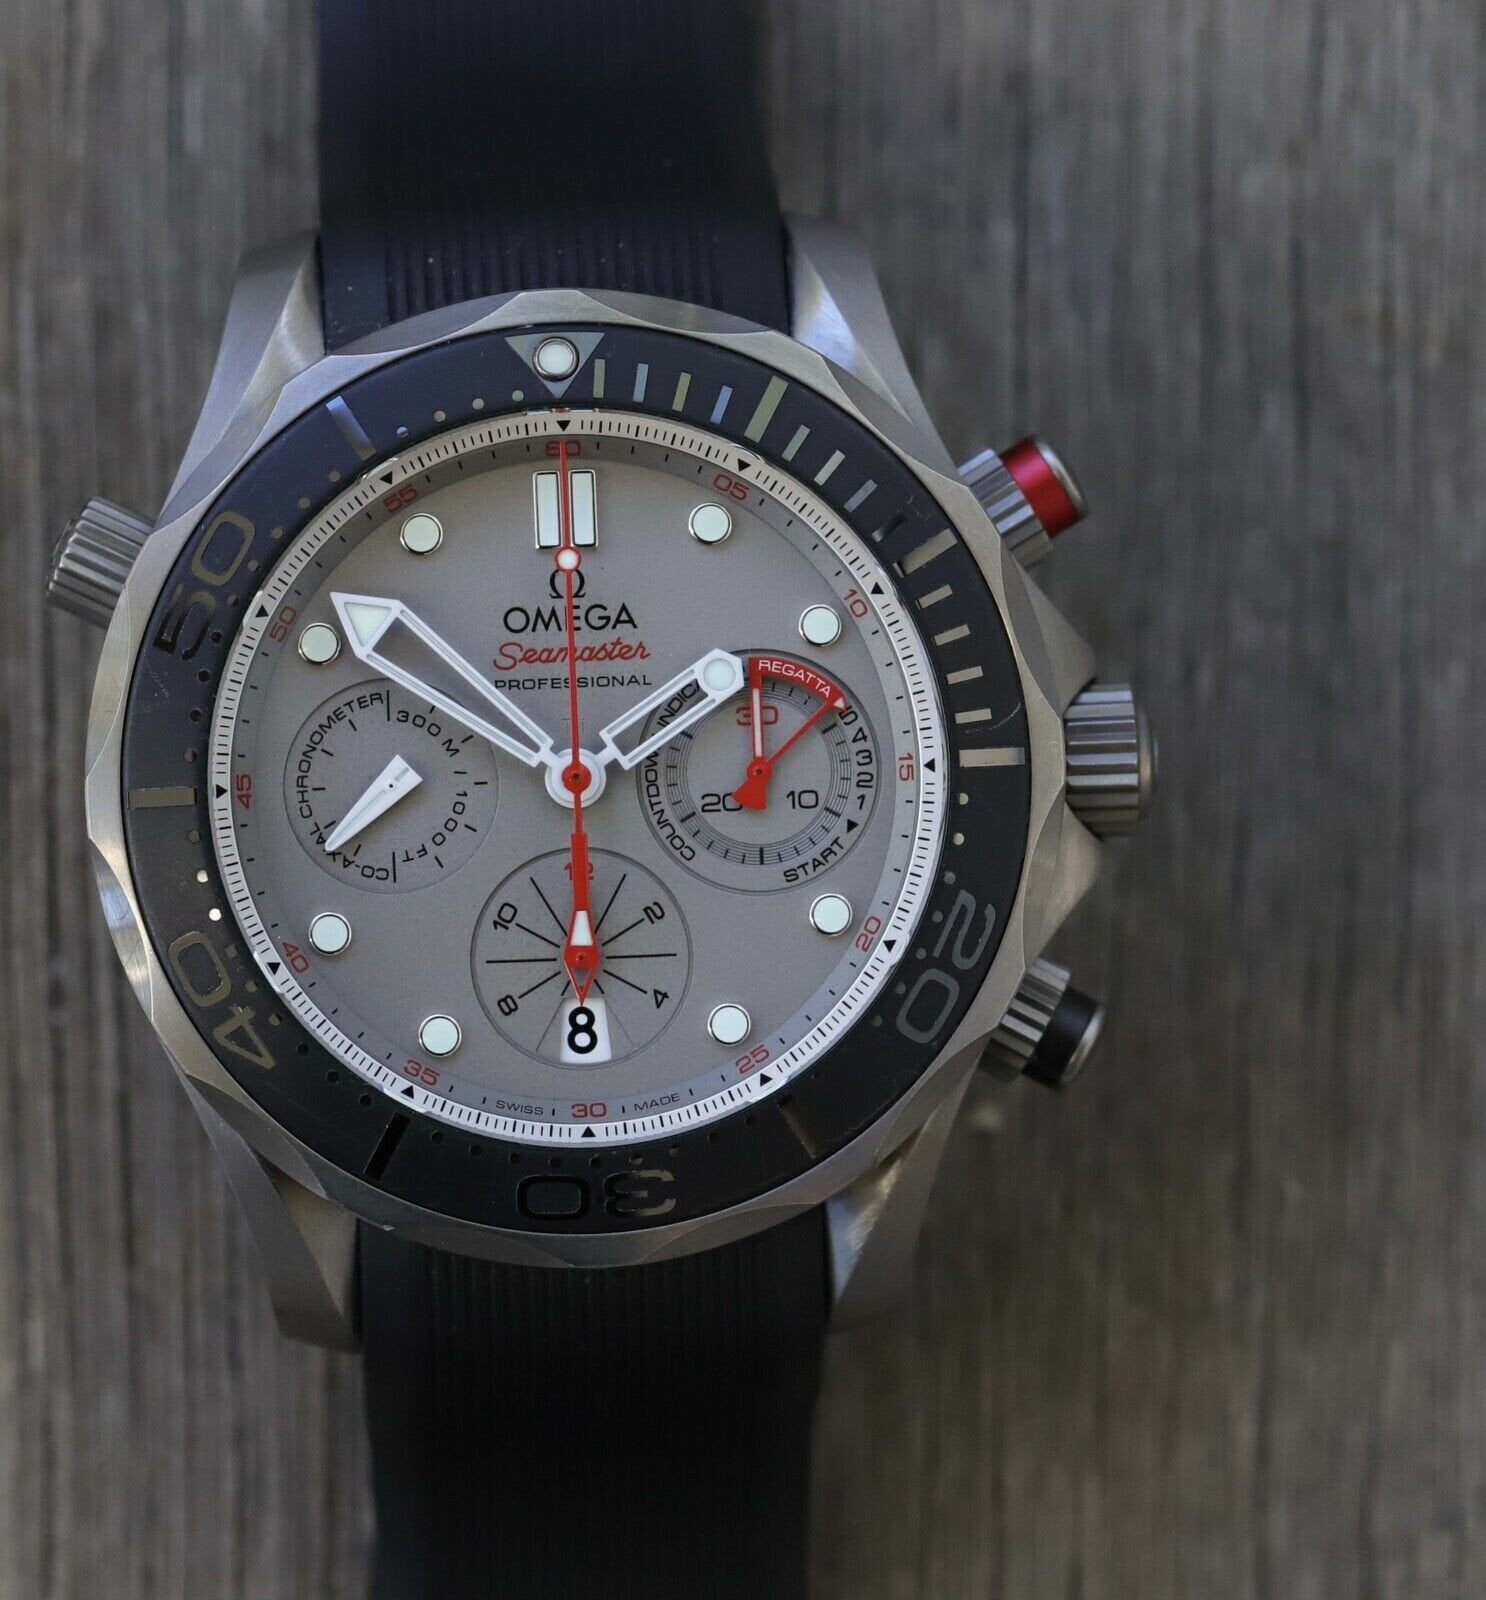 Omega_Seamaster_ETNZ_Co_Axial_Chronograph_44_mm_LE_212.92.44.50.99.001_-_2015_Watch_VAult_01.jpg